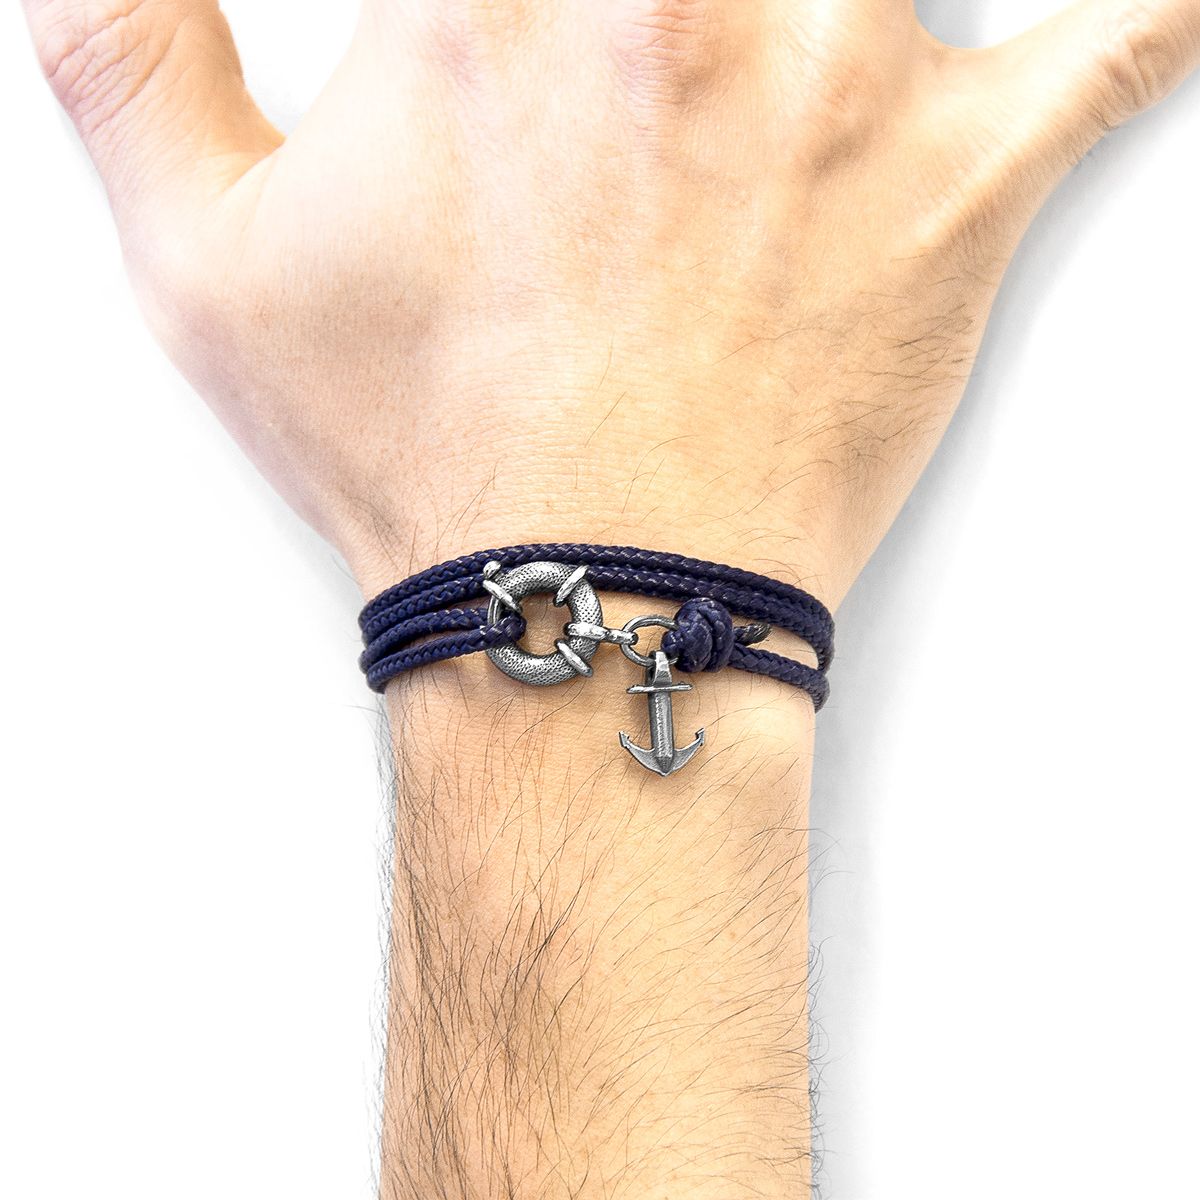 The Navy Blue Clyde Anchor Silver and Rope Bracelet was both designed and skilfully handcrafted completely in Great Britain, In Quality We Trust. For the Modern Journeyman (and woman), ANCHOR & CREW takes ownership of an exploratory lifestyle and enjoys the Happy-Good Life. Combining British craft manufacturing with a discerning modern-minimalist style, this ANCHOR & CREW bracelet features:

3mm diameter performance Marine Grade polyester and nylon rope (GB) 
Secure solid .925 sterling silver lifeboat clasp and drop anchor (GB)  

SIZING
This bracelet is one size fits all, with the rope able to extend or tighten to suit your wrist size. To take the bracelet on or off your wrist, simply slide the one adjustable knot around the rope to make the loop size smaller or larger. Once set, keep the loop size consistent and simply slide the latch within the clasp and feed the rope into or out of the toggle.